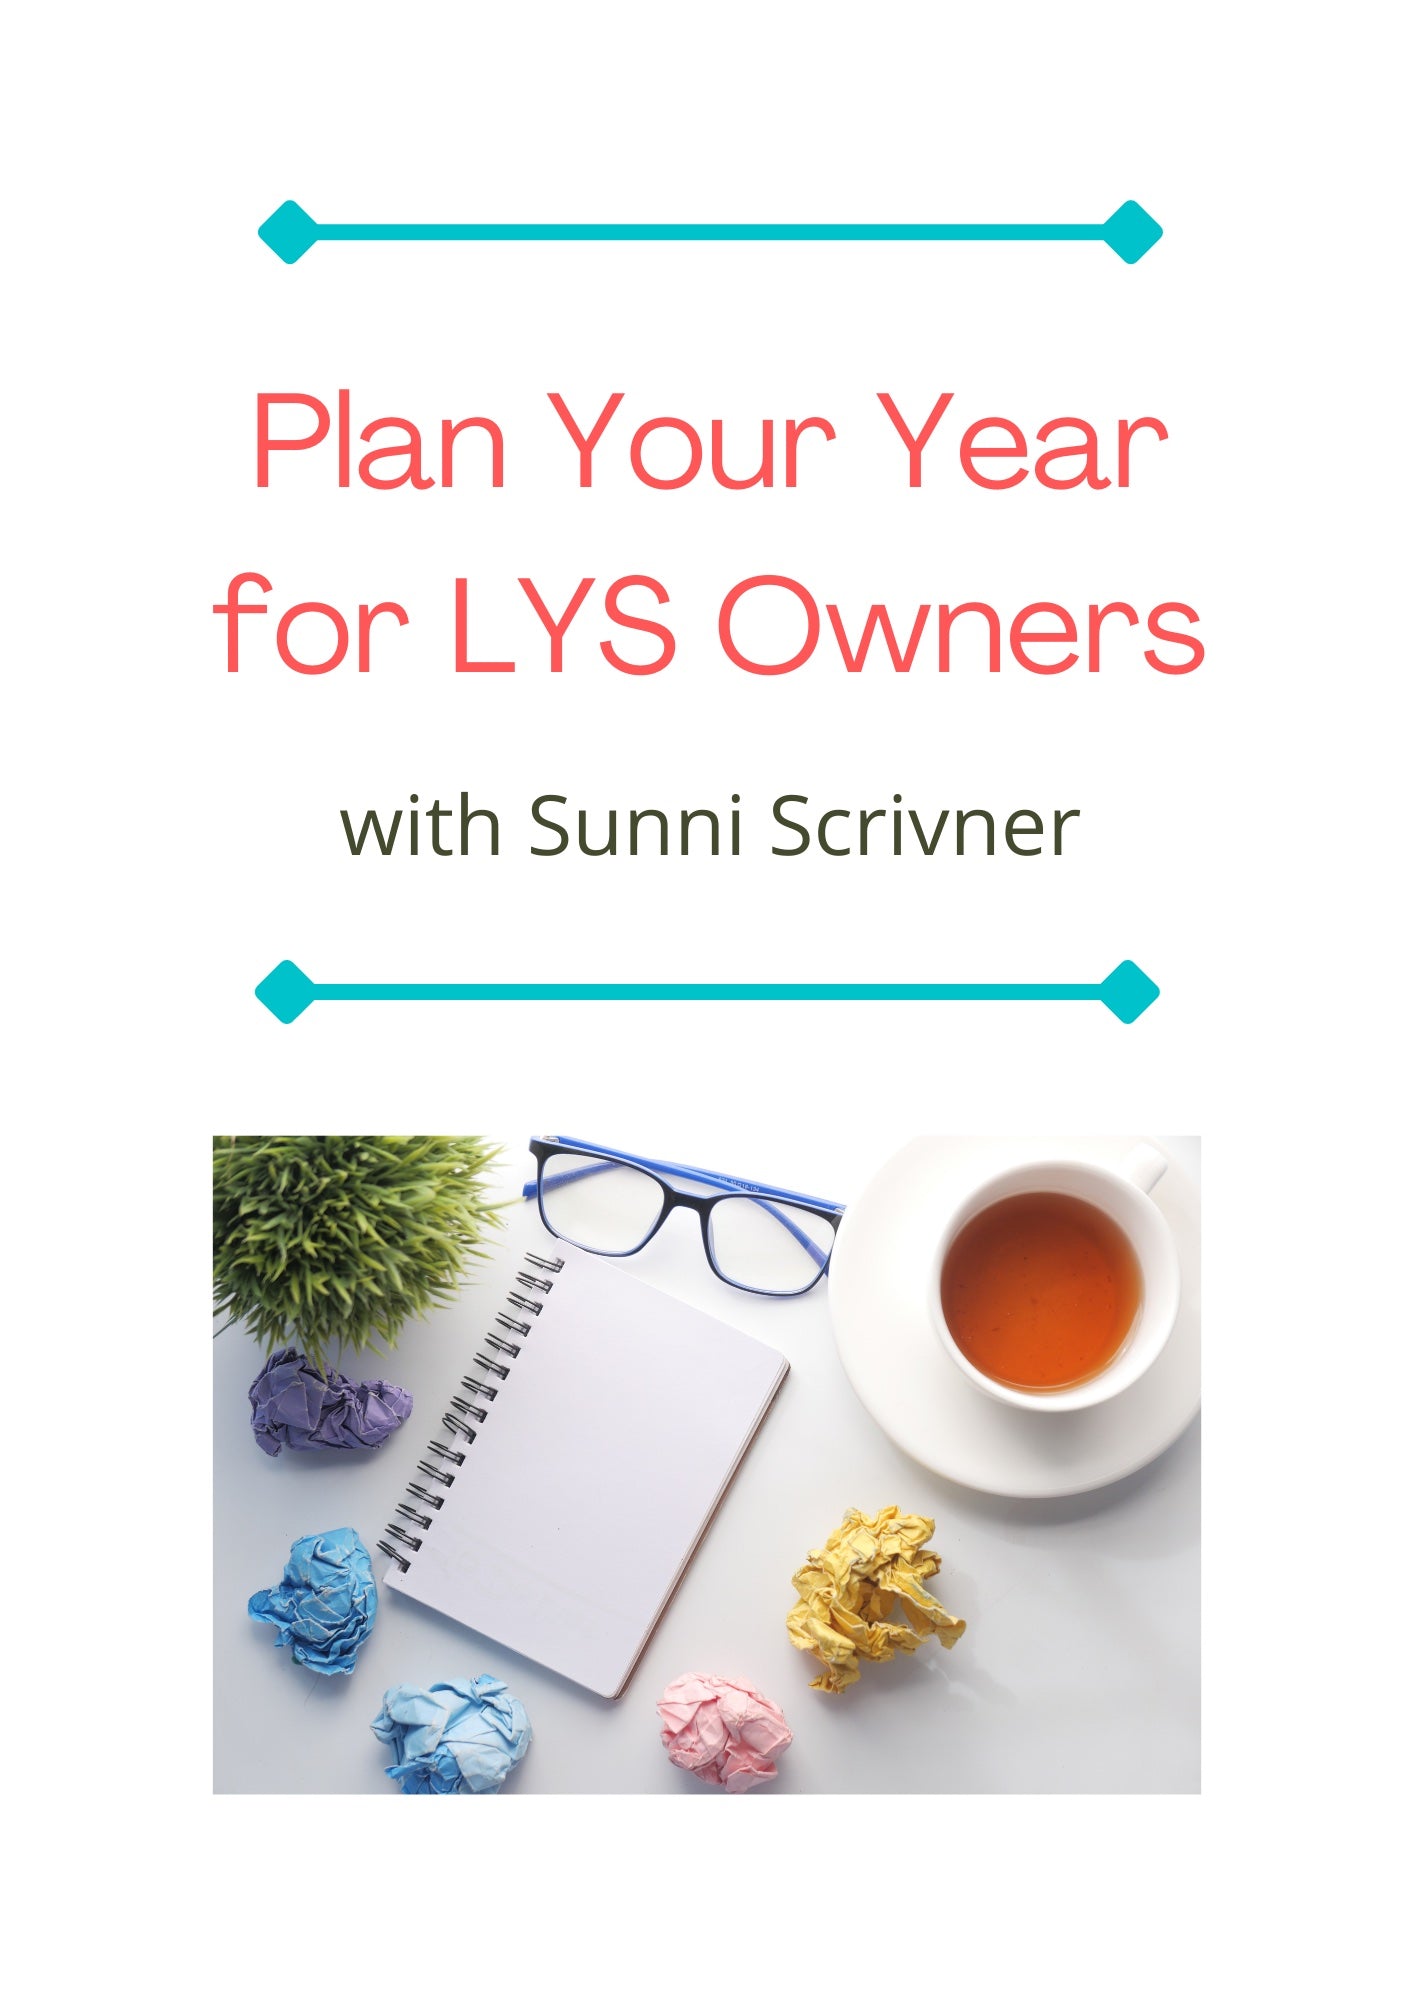 Plan Your Year Class for LYS Owners